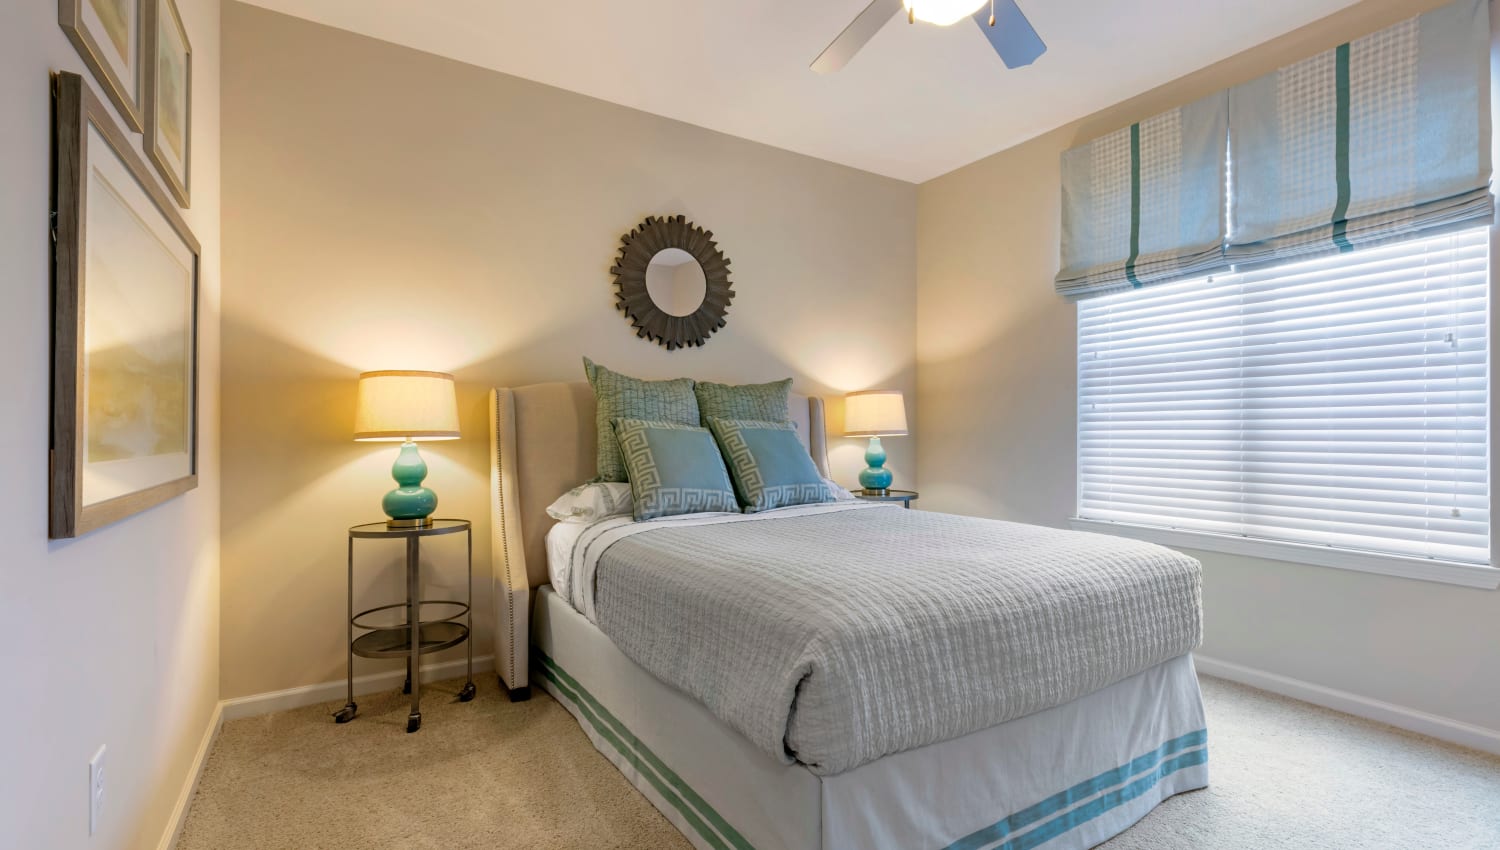 Model bedroom with great natural light at The Village at Apison Pike in Ooltewah, Tennessee